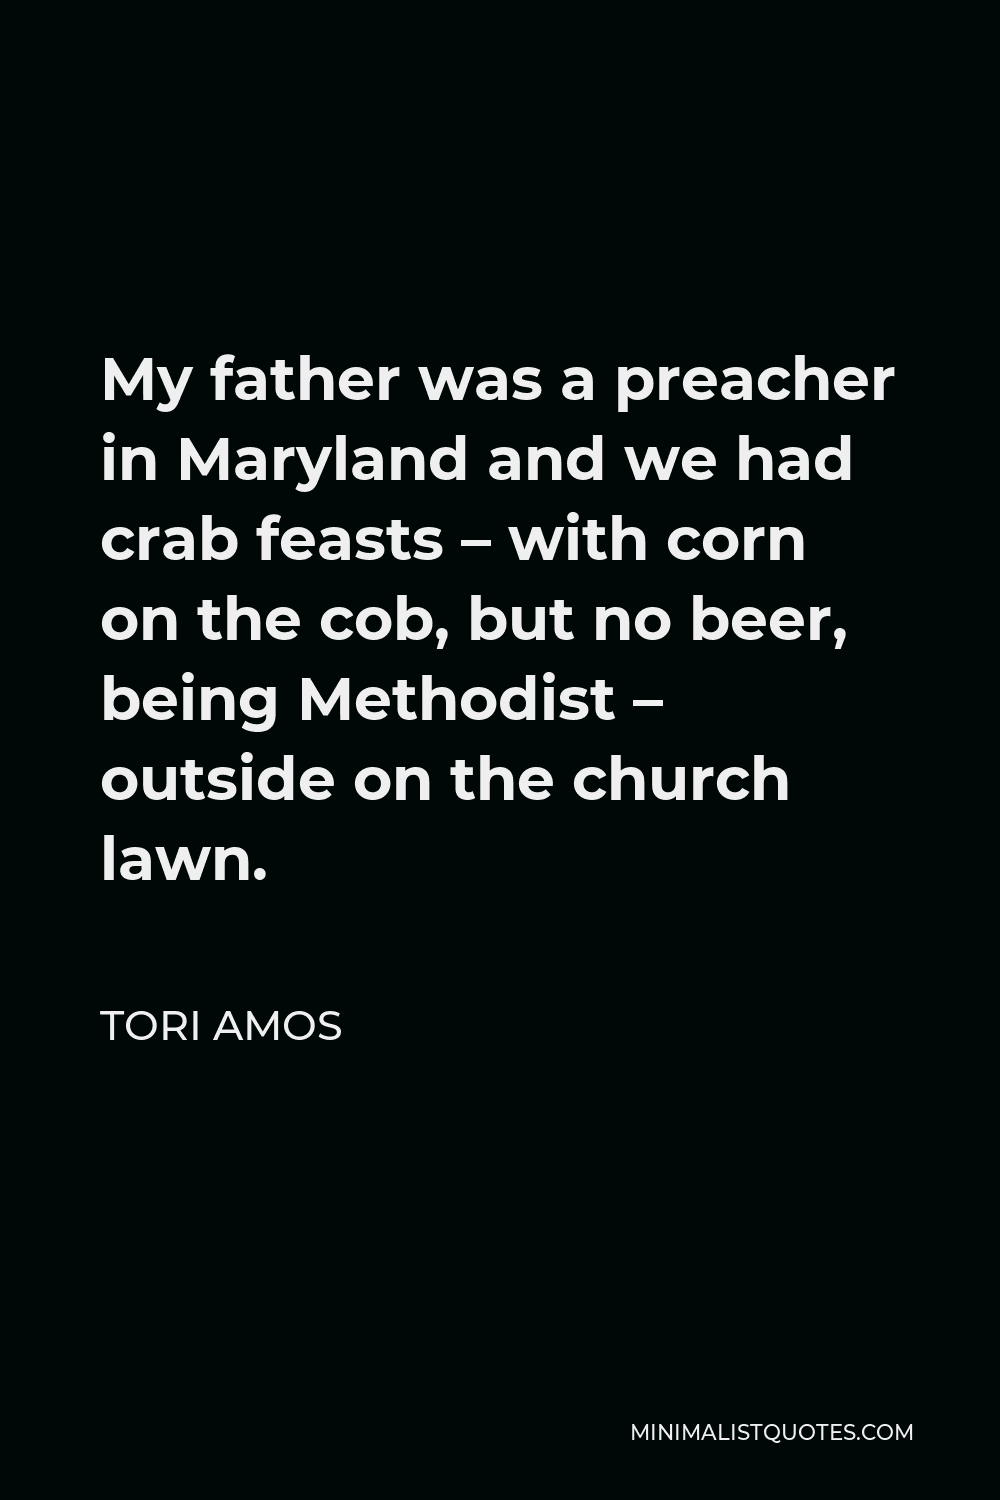 Tori Amos Quote - My father was a preacher in Maryland and we had crab feasts – with corn on the cob, but no beer, being Methodist – outside on the church lawn.